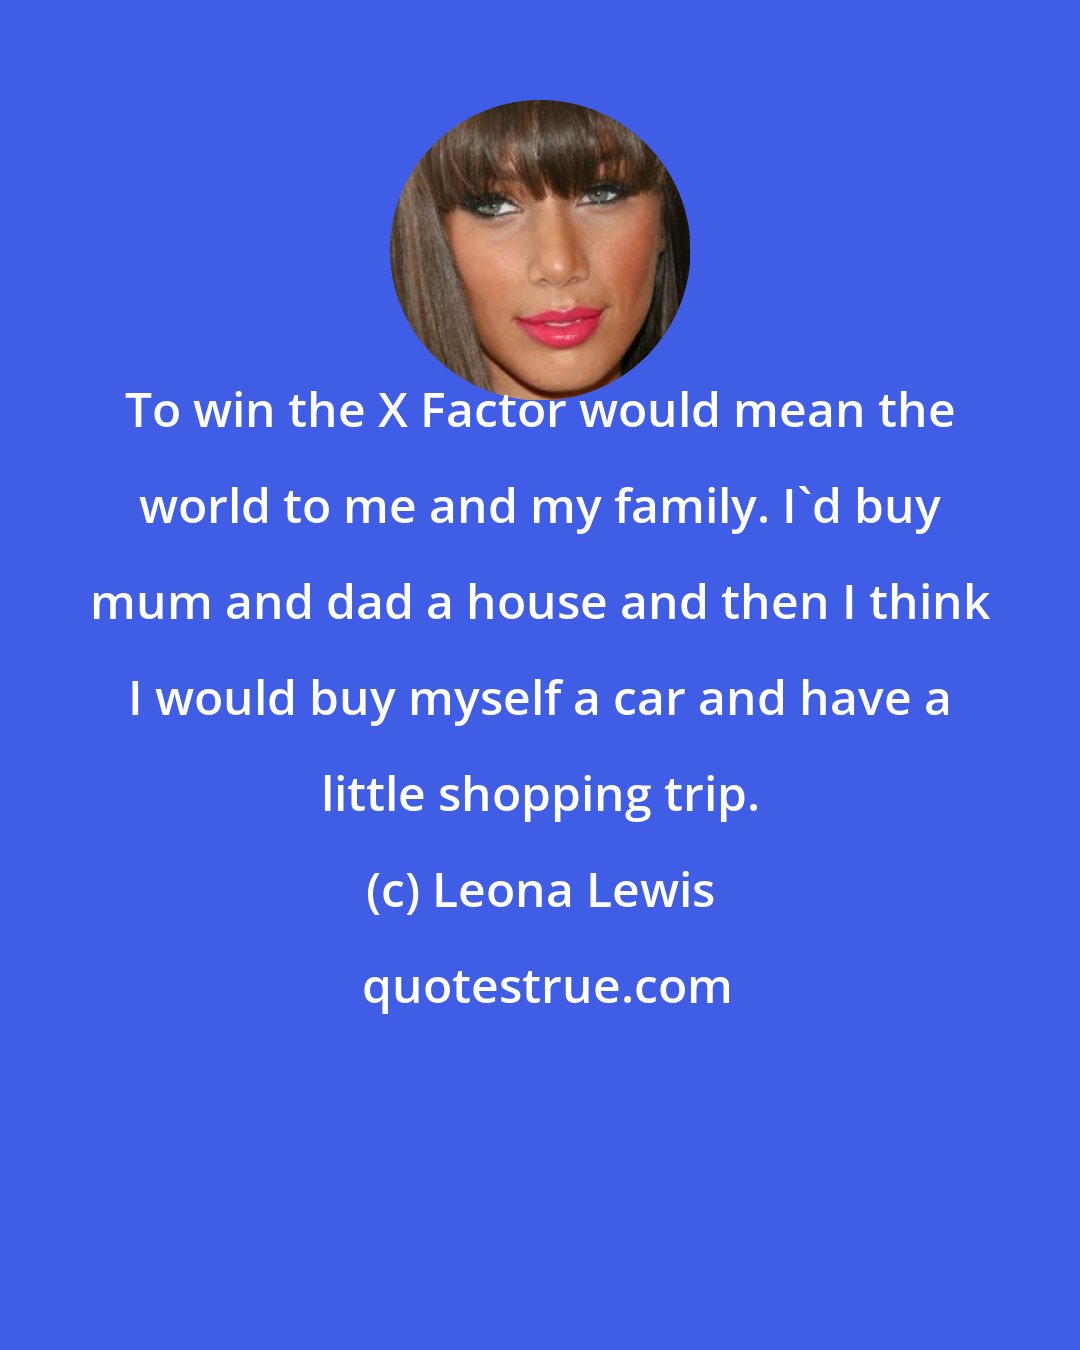 Leona Lewis: To win the X Factor would mean the world to me and my family. I'd buy mum and dad a house and then I think I would buy myself a car and have a little shopping trip.